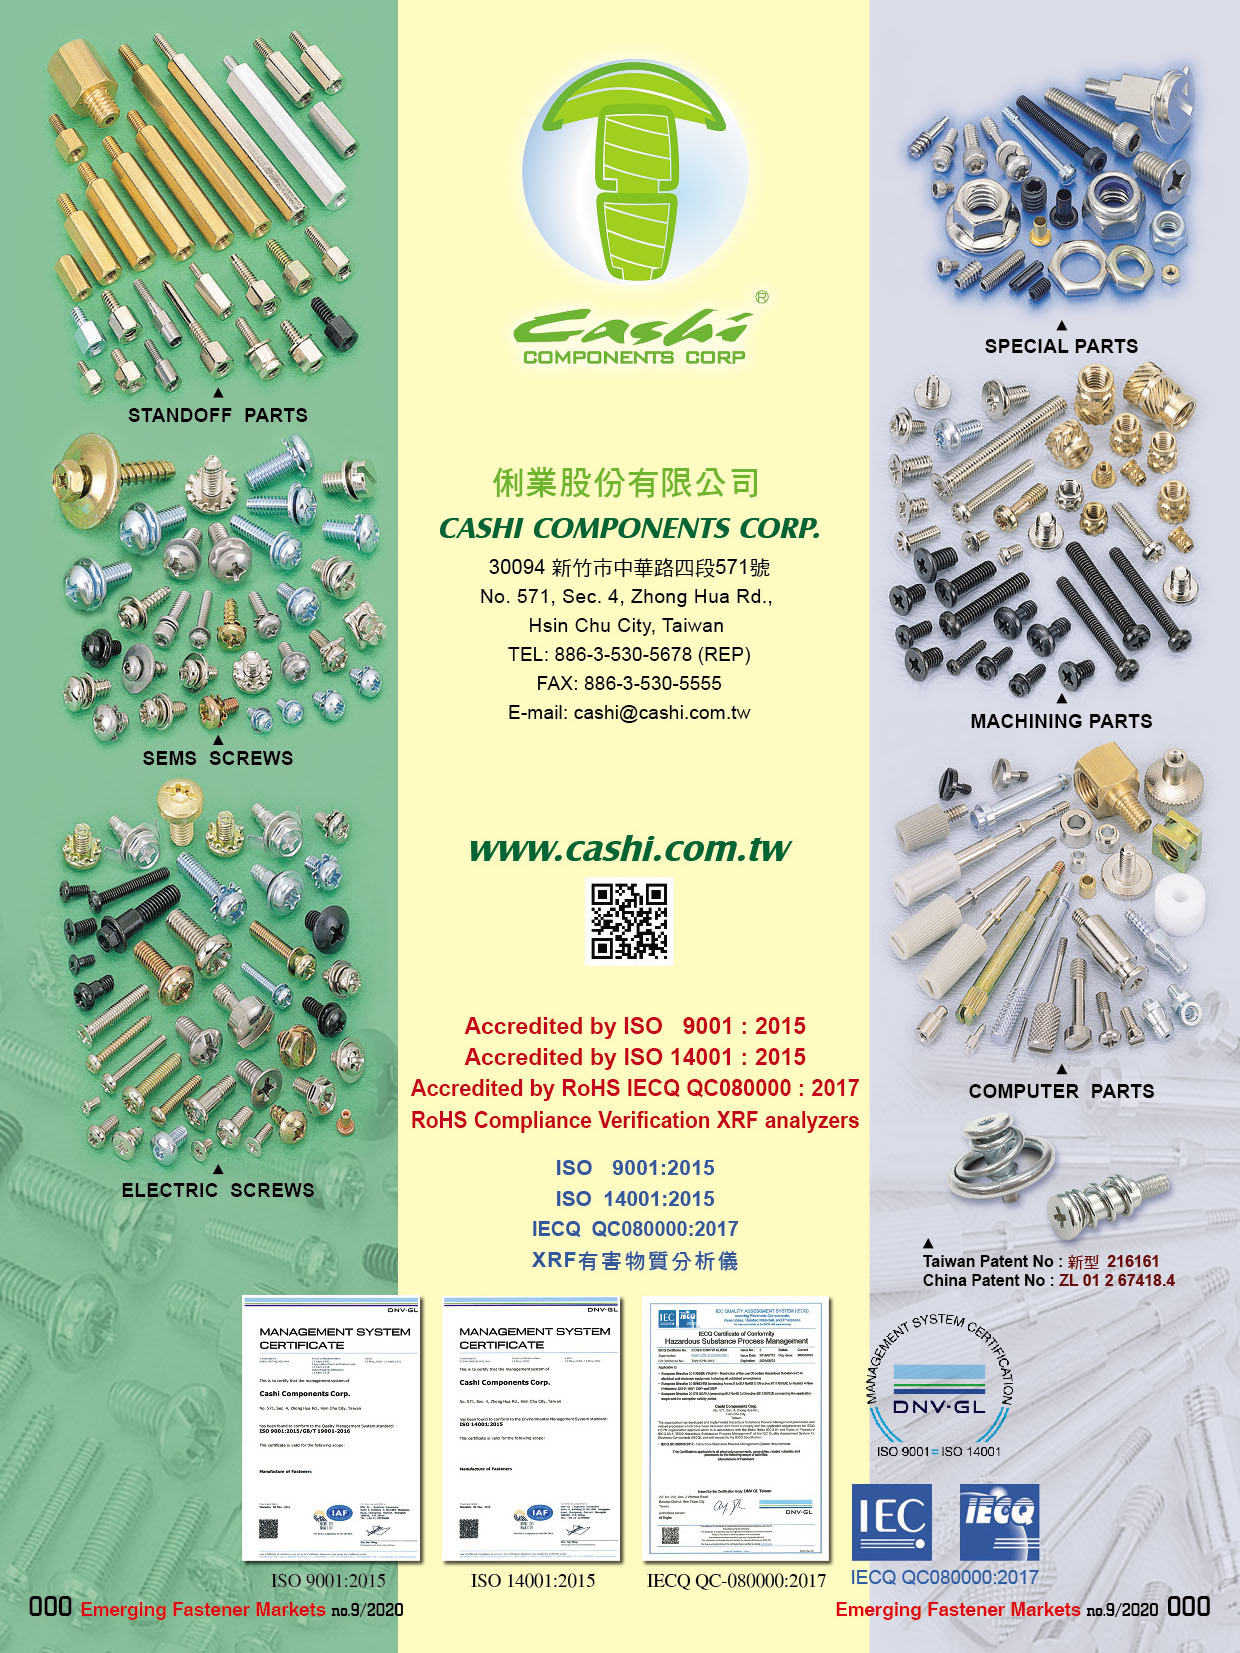 CASHI COMPONENTS CORP.  , STANDOFF PARTS,SEMS SCREWS,ELECTRIC SCREWS,SPECIAL PARTS,MACHINING PARTS,COMPUTER PARTS , Self-clinching Nuts